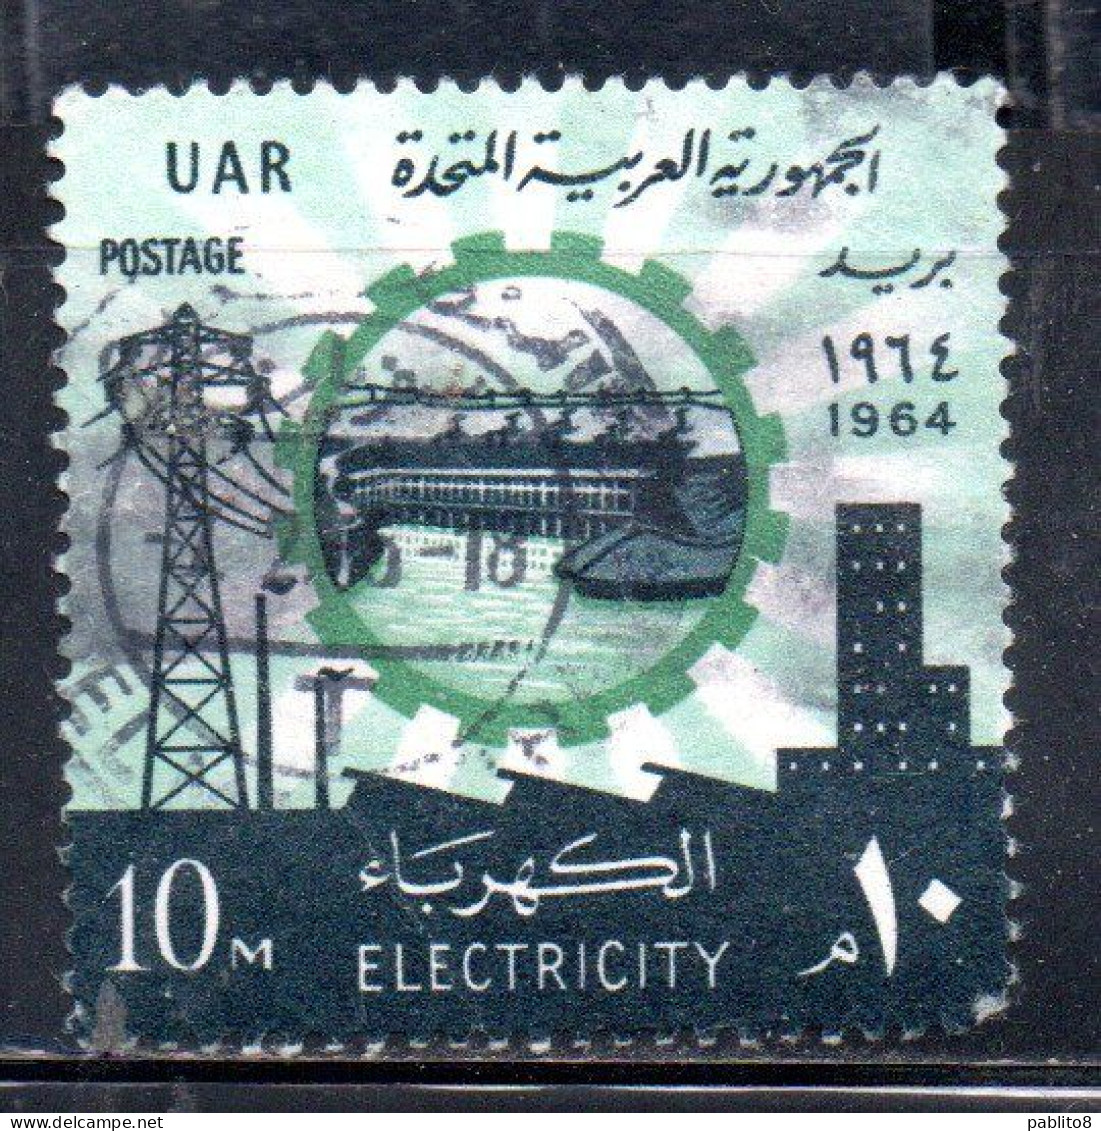 UAR EGYPT EGITTO 1964 ELECTRICITY ASWAN HIGH DAM HYDROELICTRIC POWER STATION LAND RECLAMATION 10m USED USATO - Gebraucht